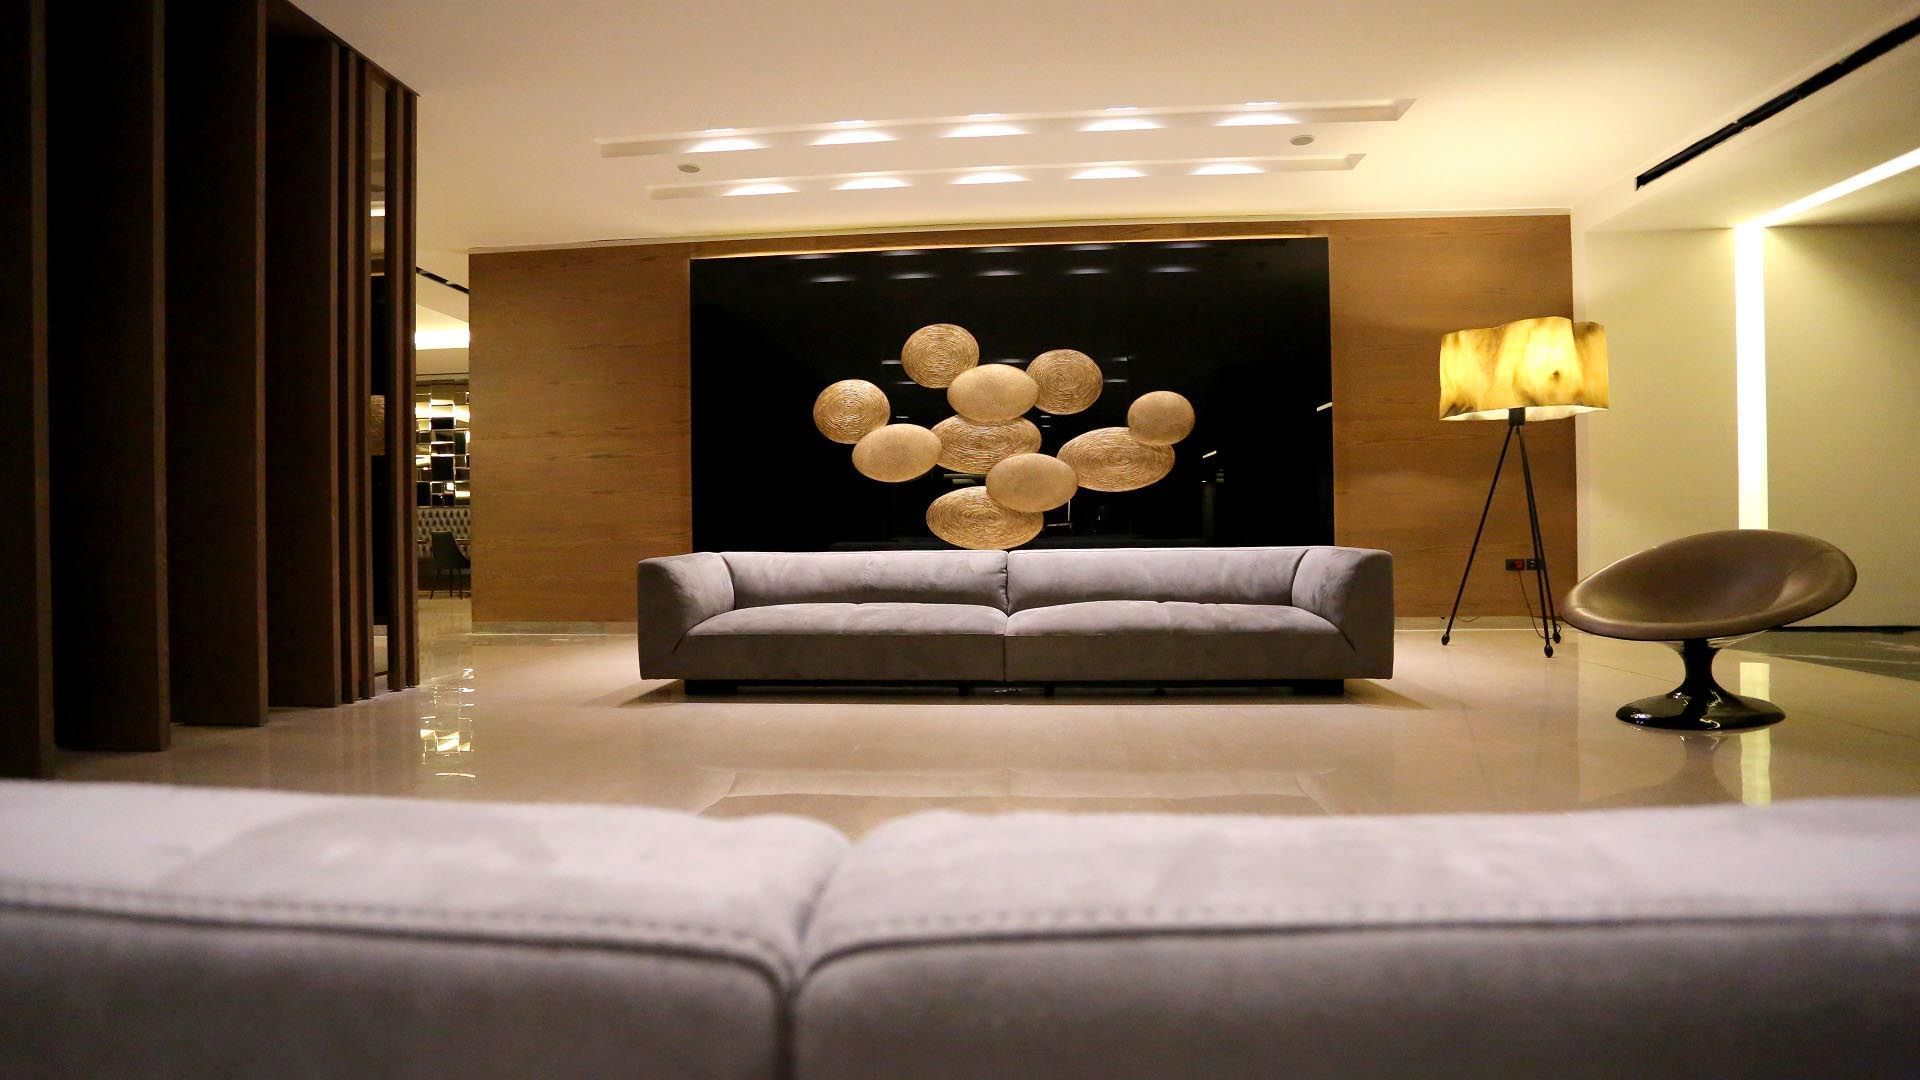 Lobby at Mist Hotel and Spa